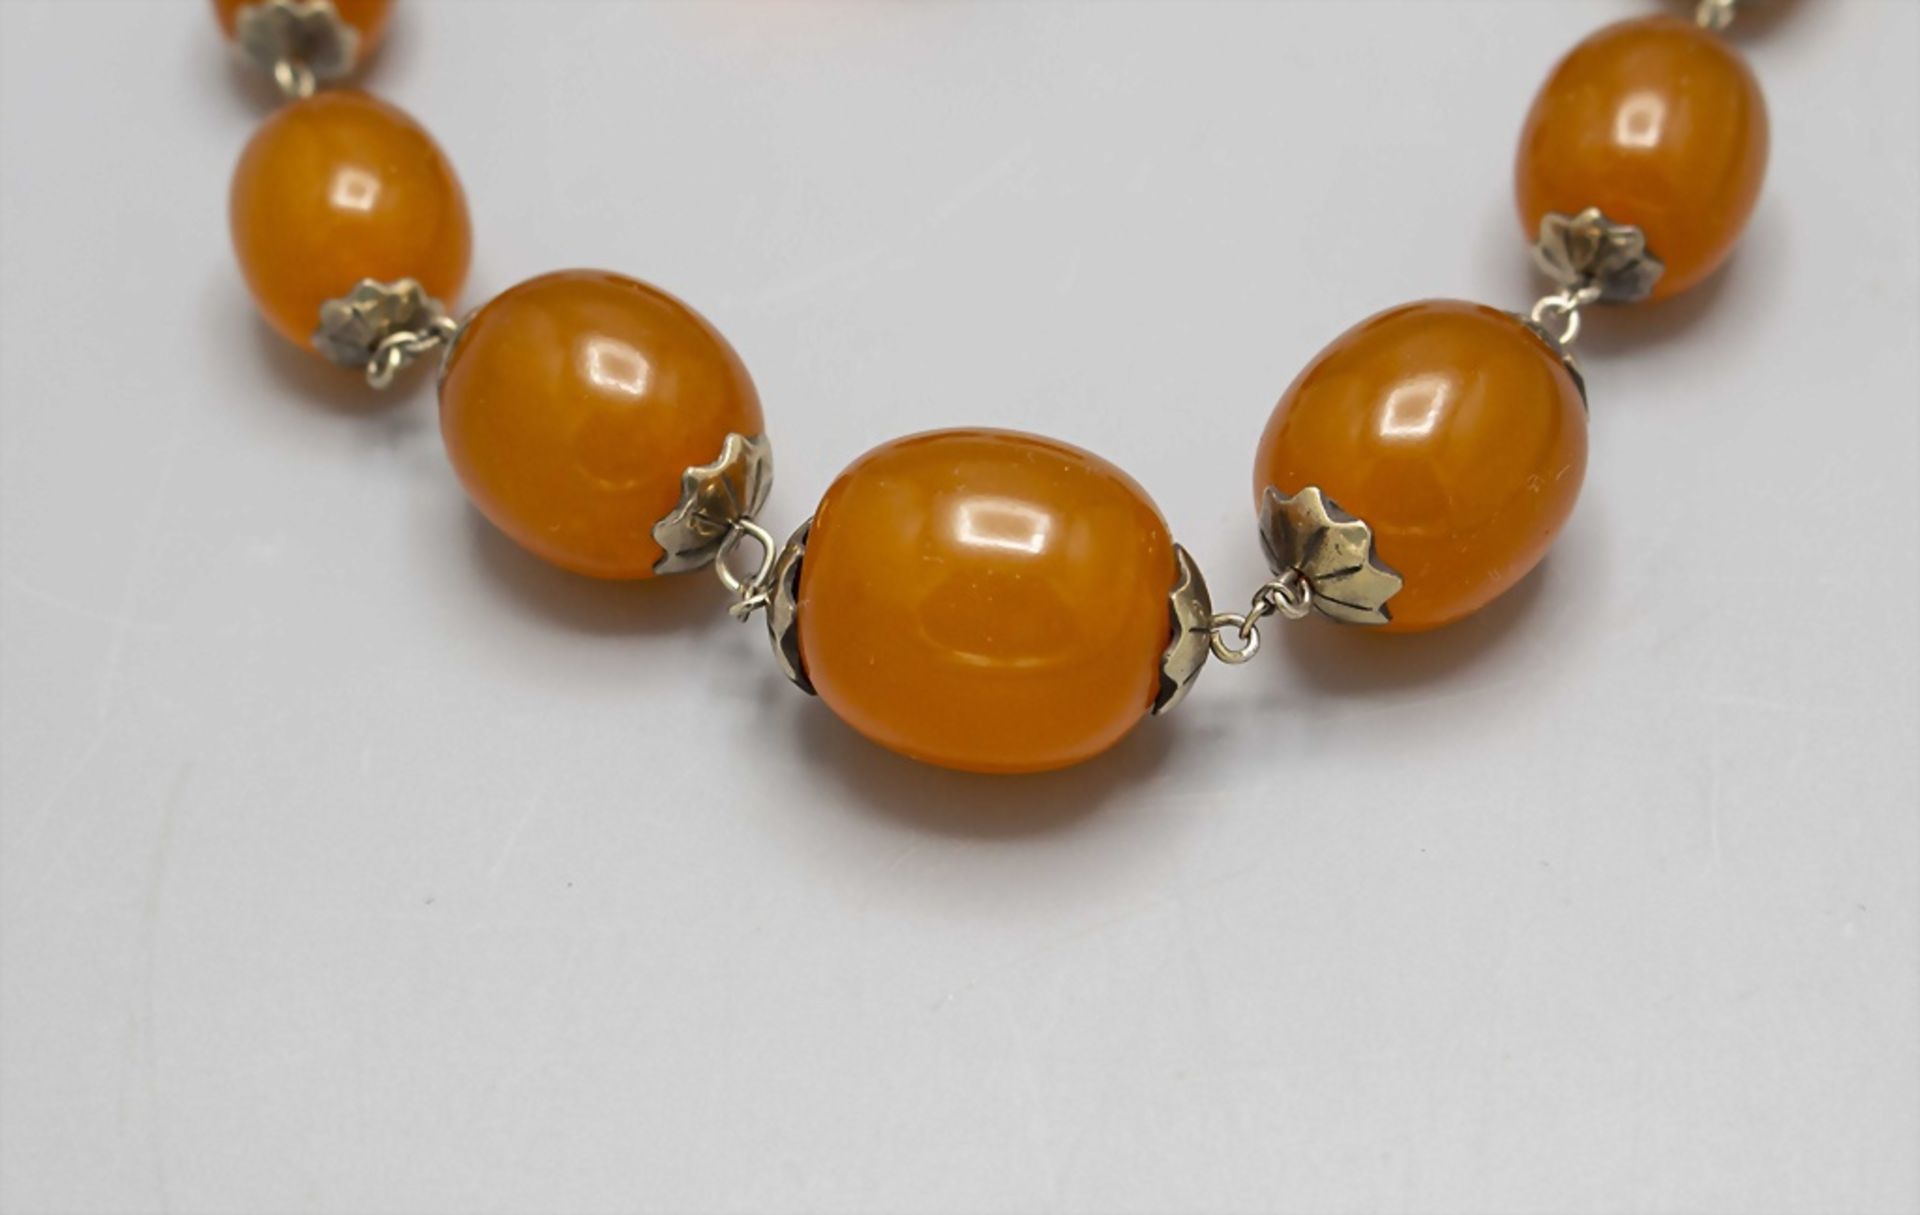 Bernsteinkette mit Ohrclips / An amber neclace with earclips - Image 2 of 3